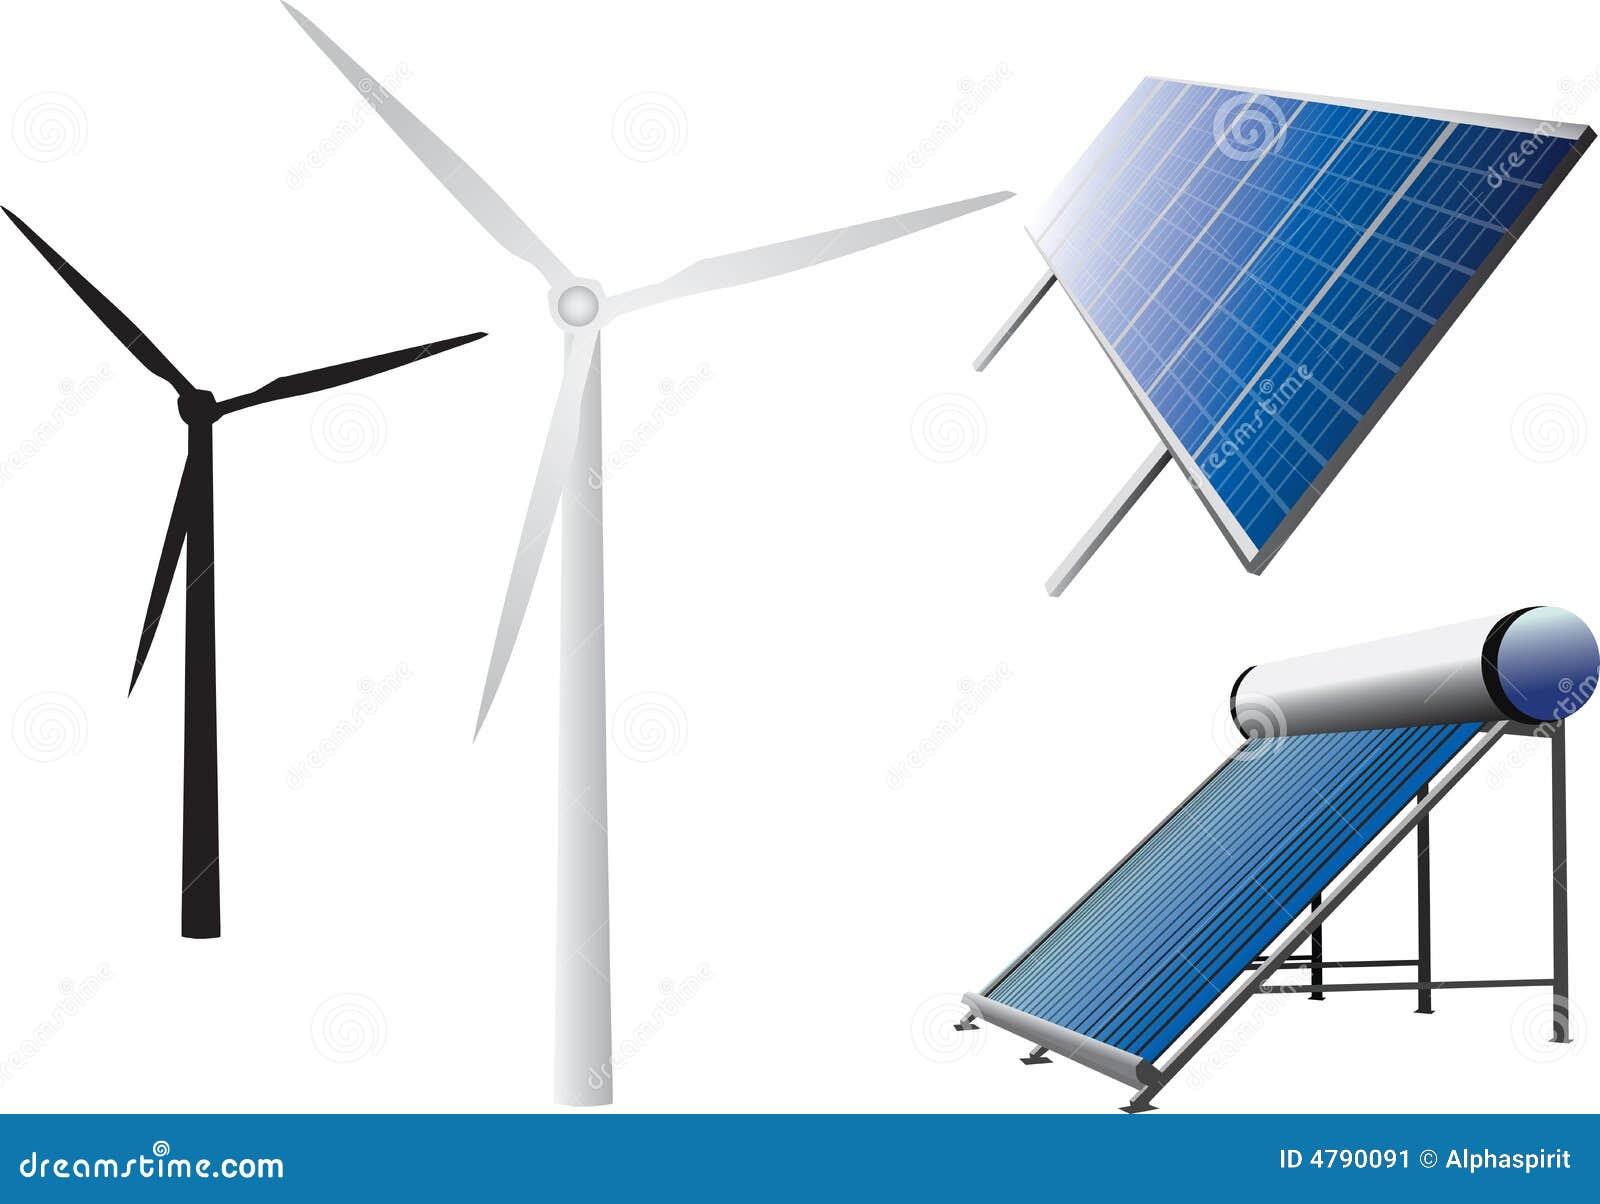 Icons of solar water heating system, solar panels, wind turbines.